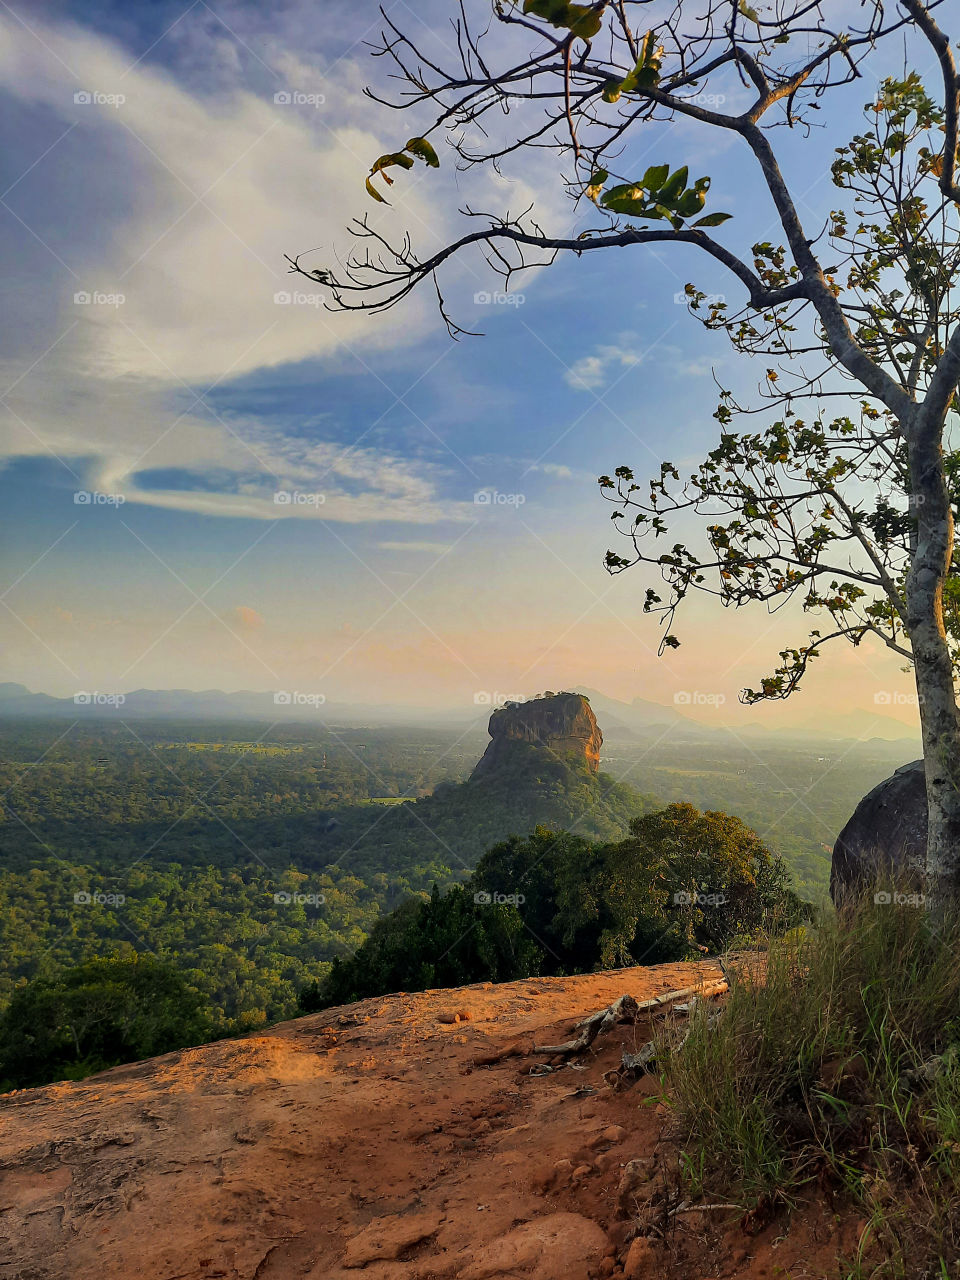 Sigiriya Rock Fortress, a UNESCO heritage site in its glory. Scenic evening views from the Pidurangala Rock with lush greenary and breathtaking views.